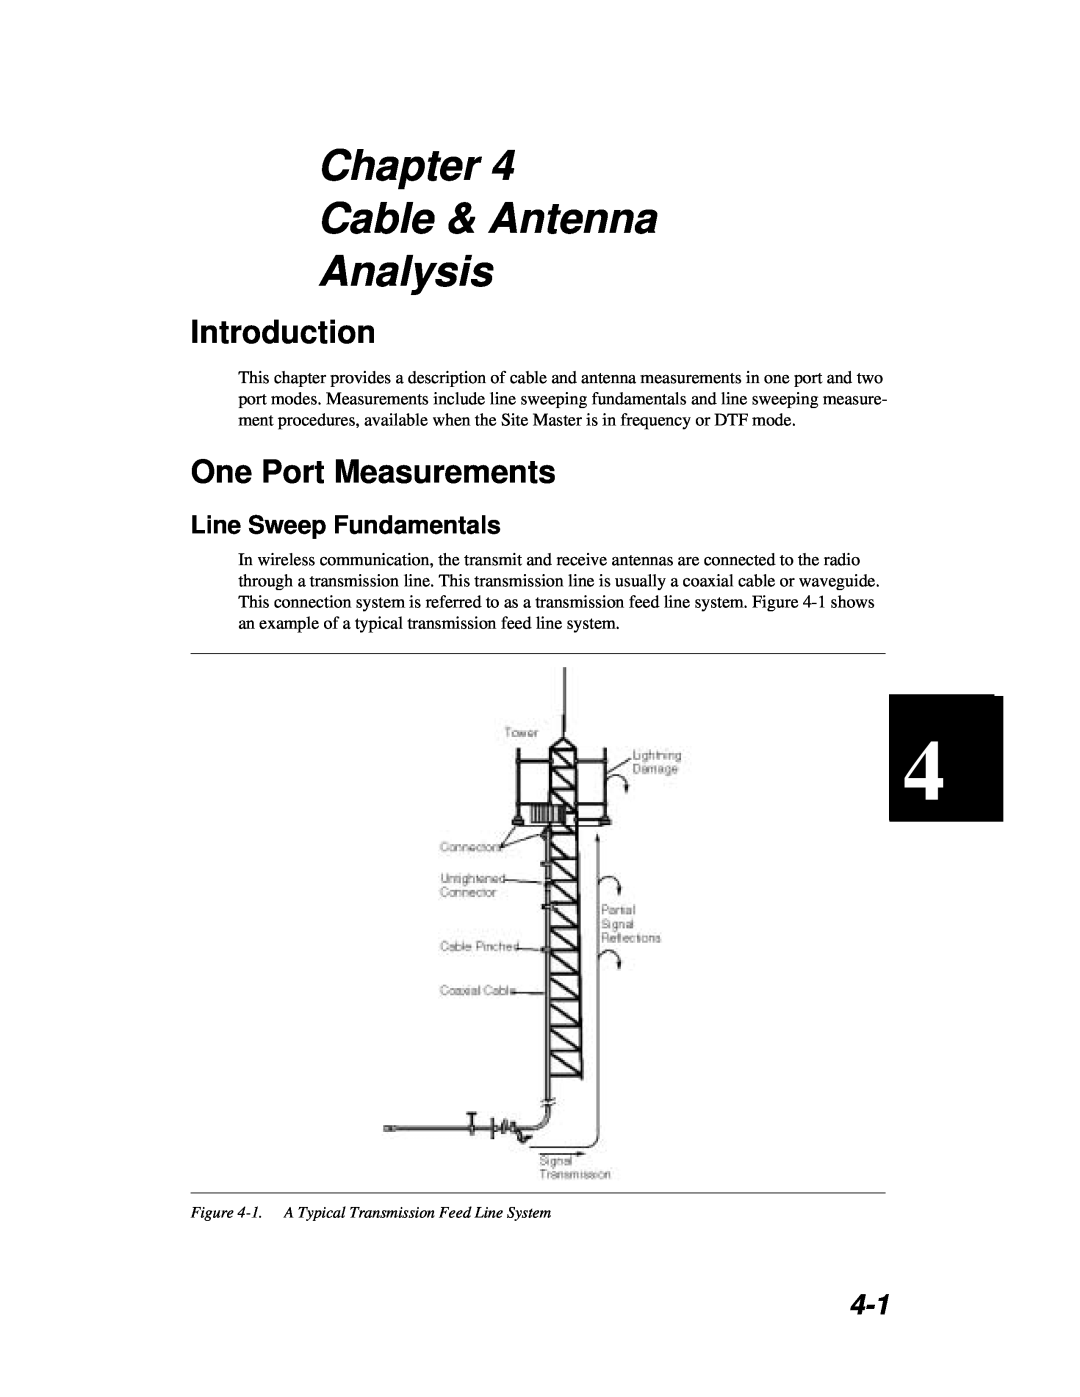 Anritsu S251C manual Chapter Cable & Antenna Analysis, One Port Measurements, Line Sweep Fundamentals, Introduction 